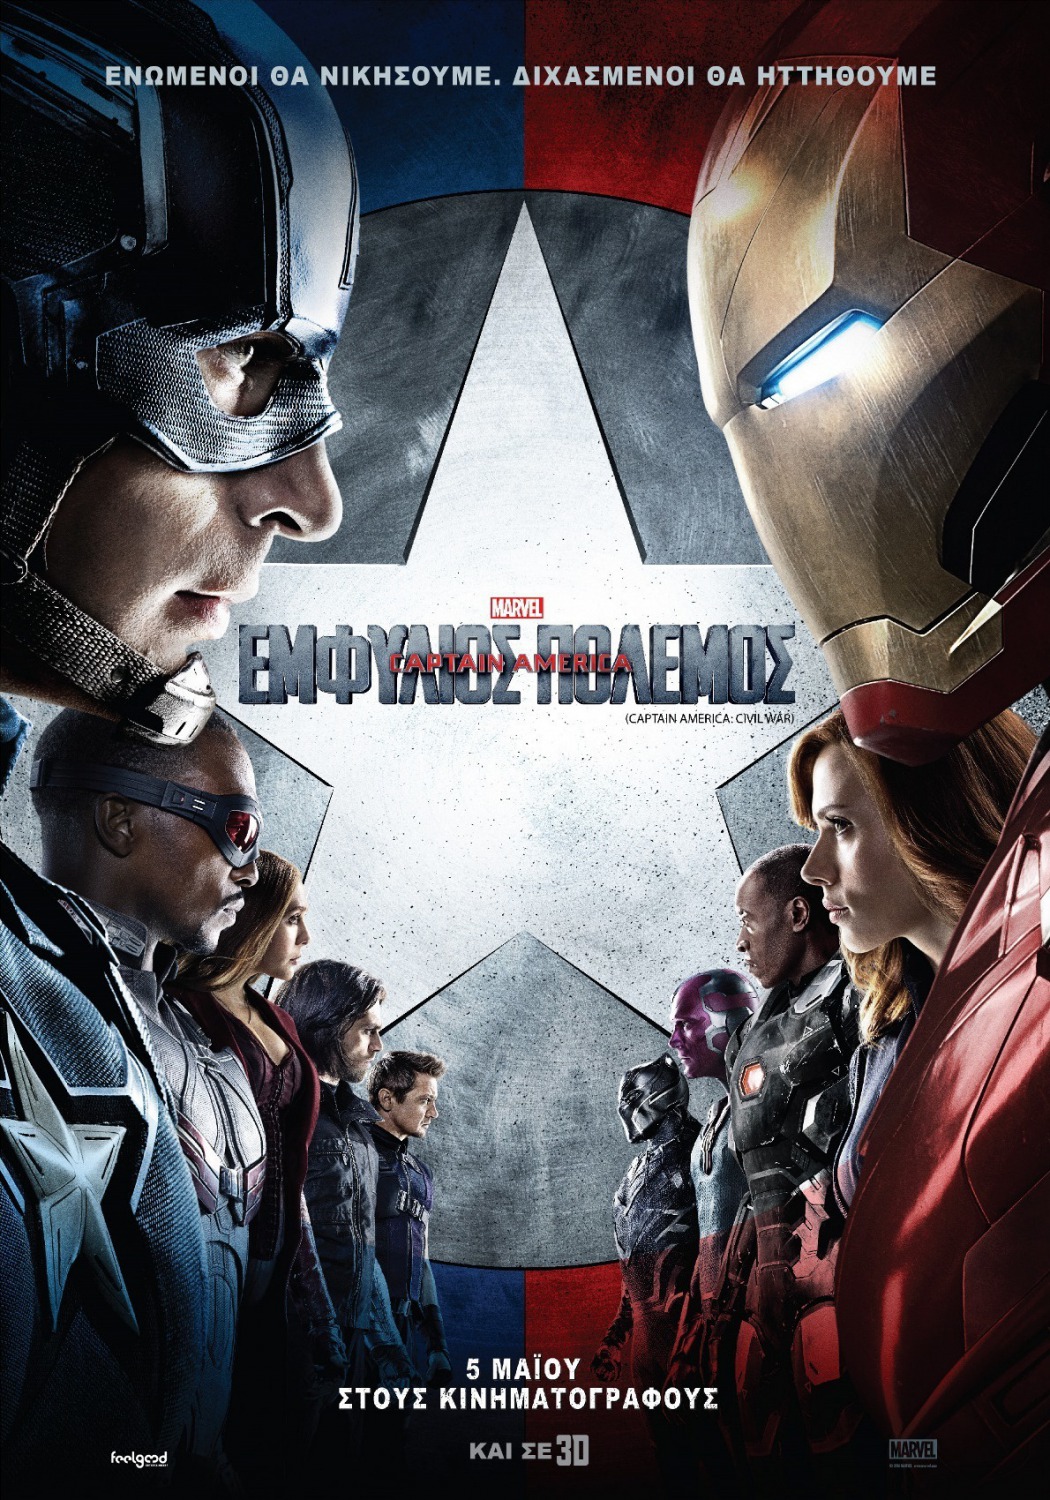 Extra Large Movie Poster Image for Captain America: Civil War (#42 of 42)